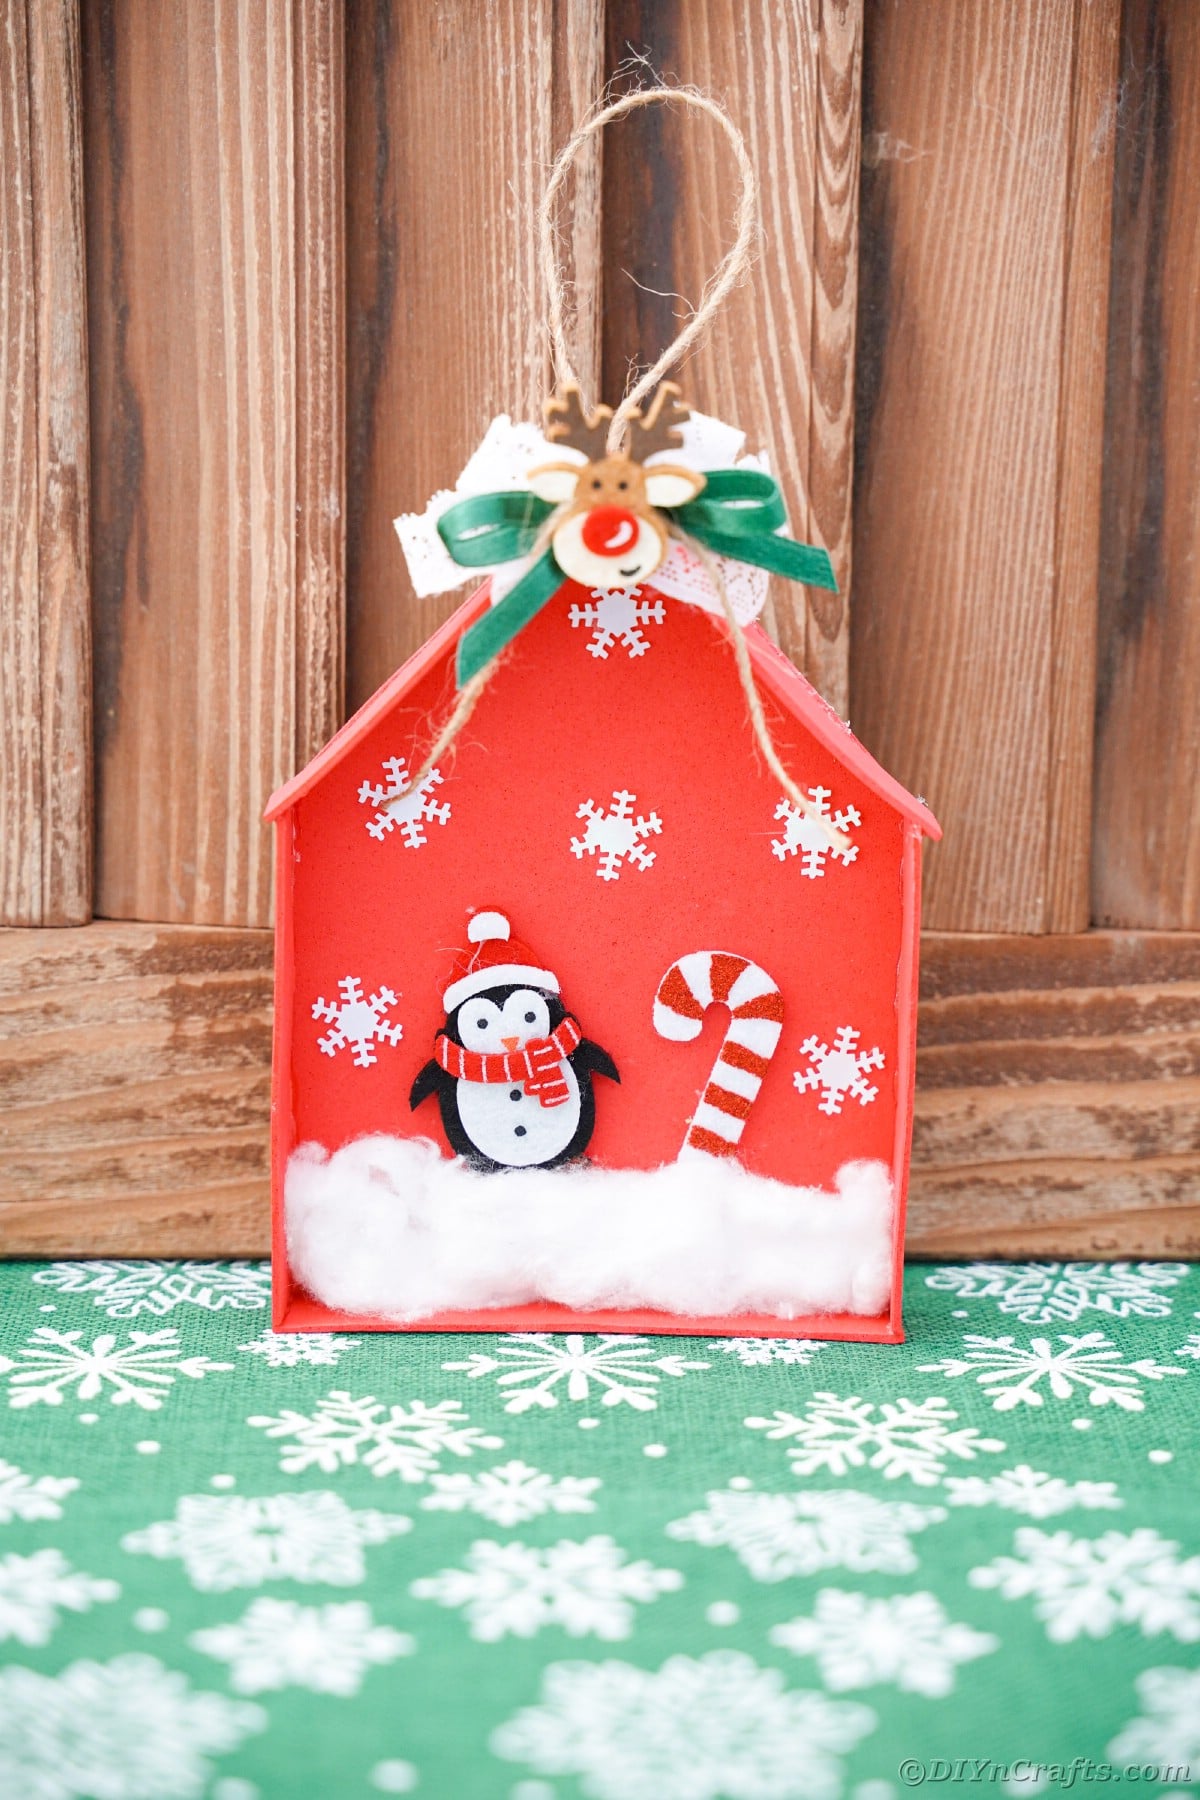 wood background behind red foam house ornament